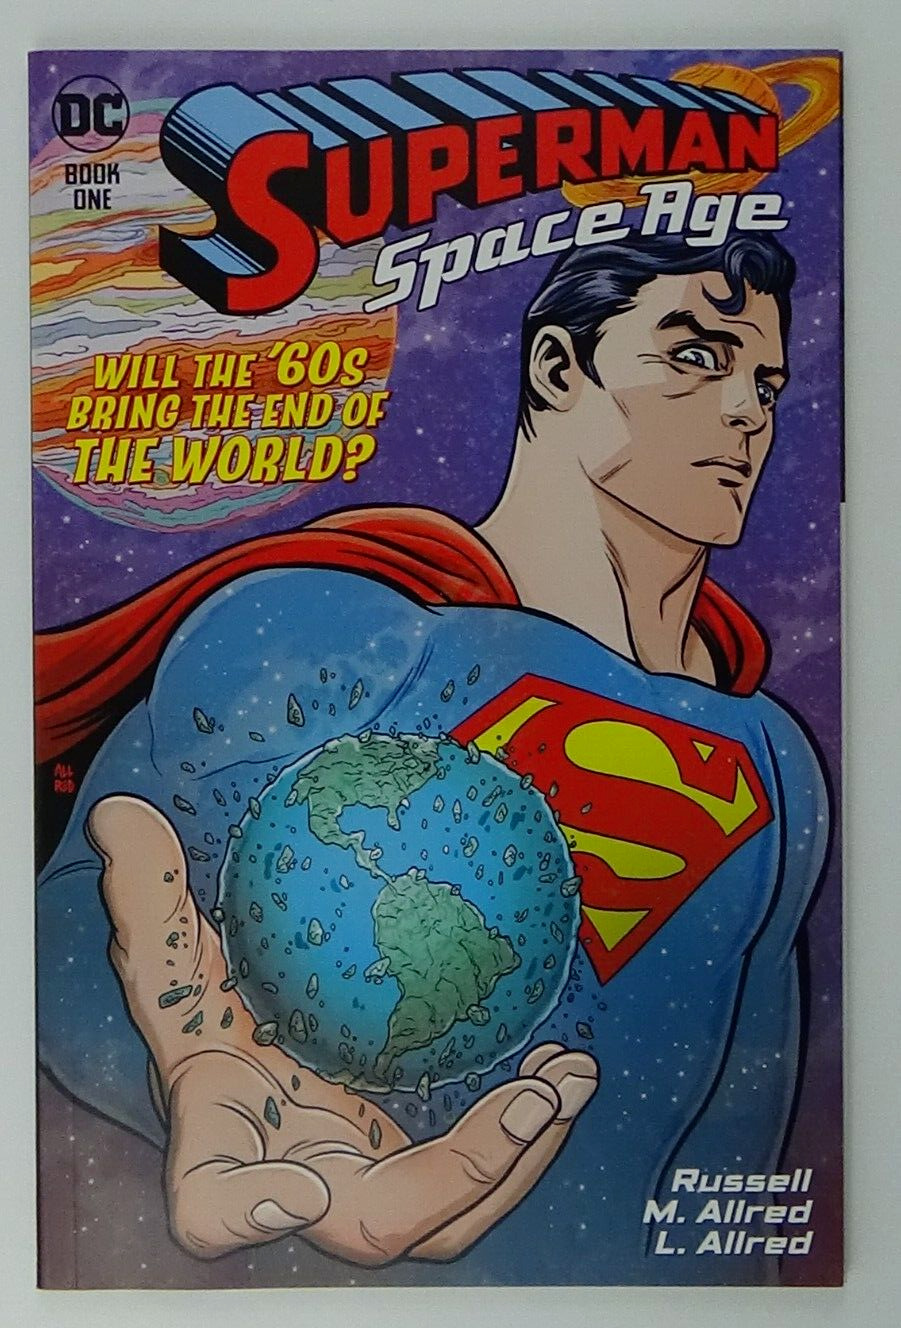 Superman: Space Age Book One  (DC Comics, 2022) Paperback #011